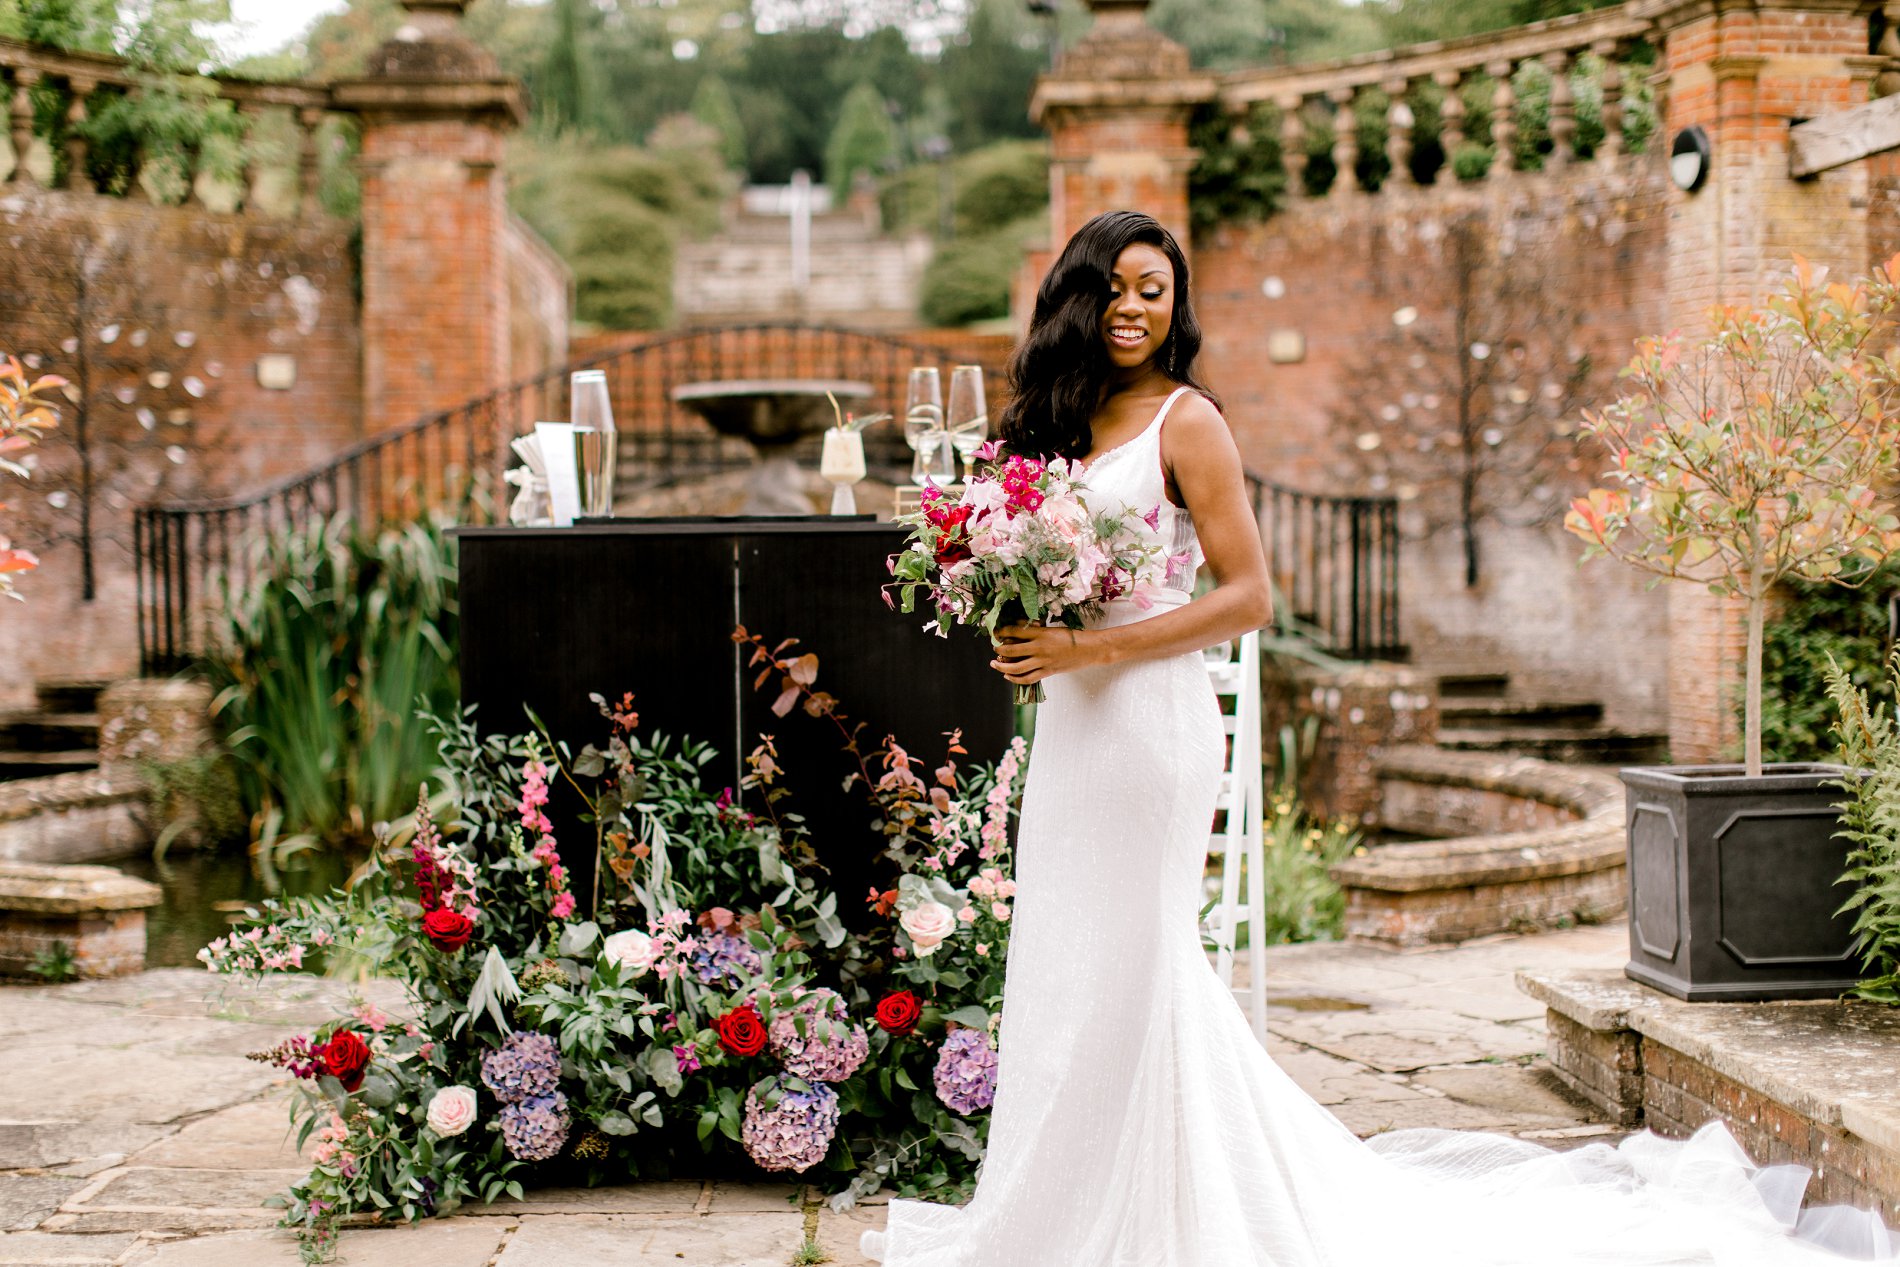 Forever Yours Styled Shoot (c) Camilla J. Hards and Courtney Dee Photography (48)